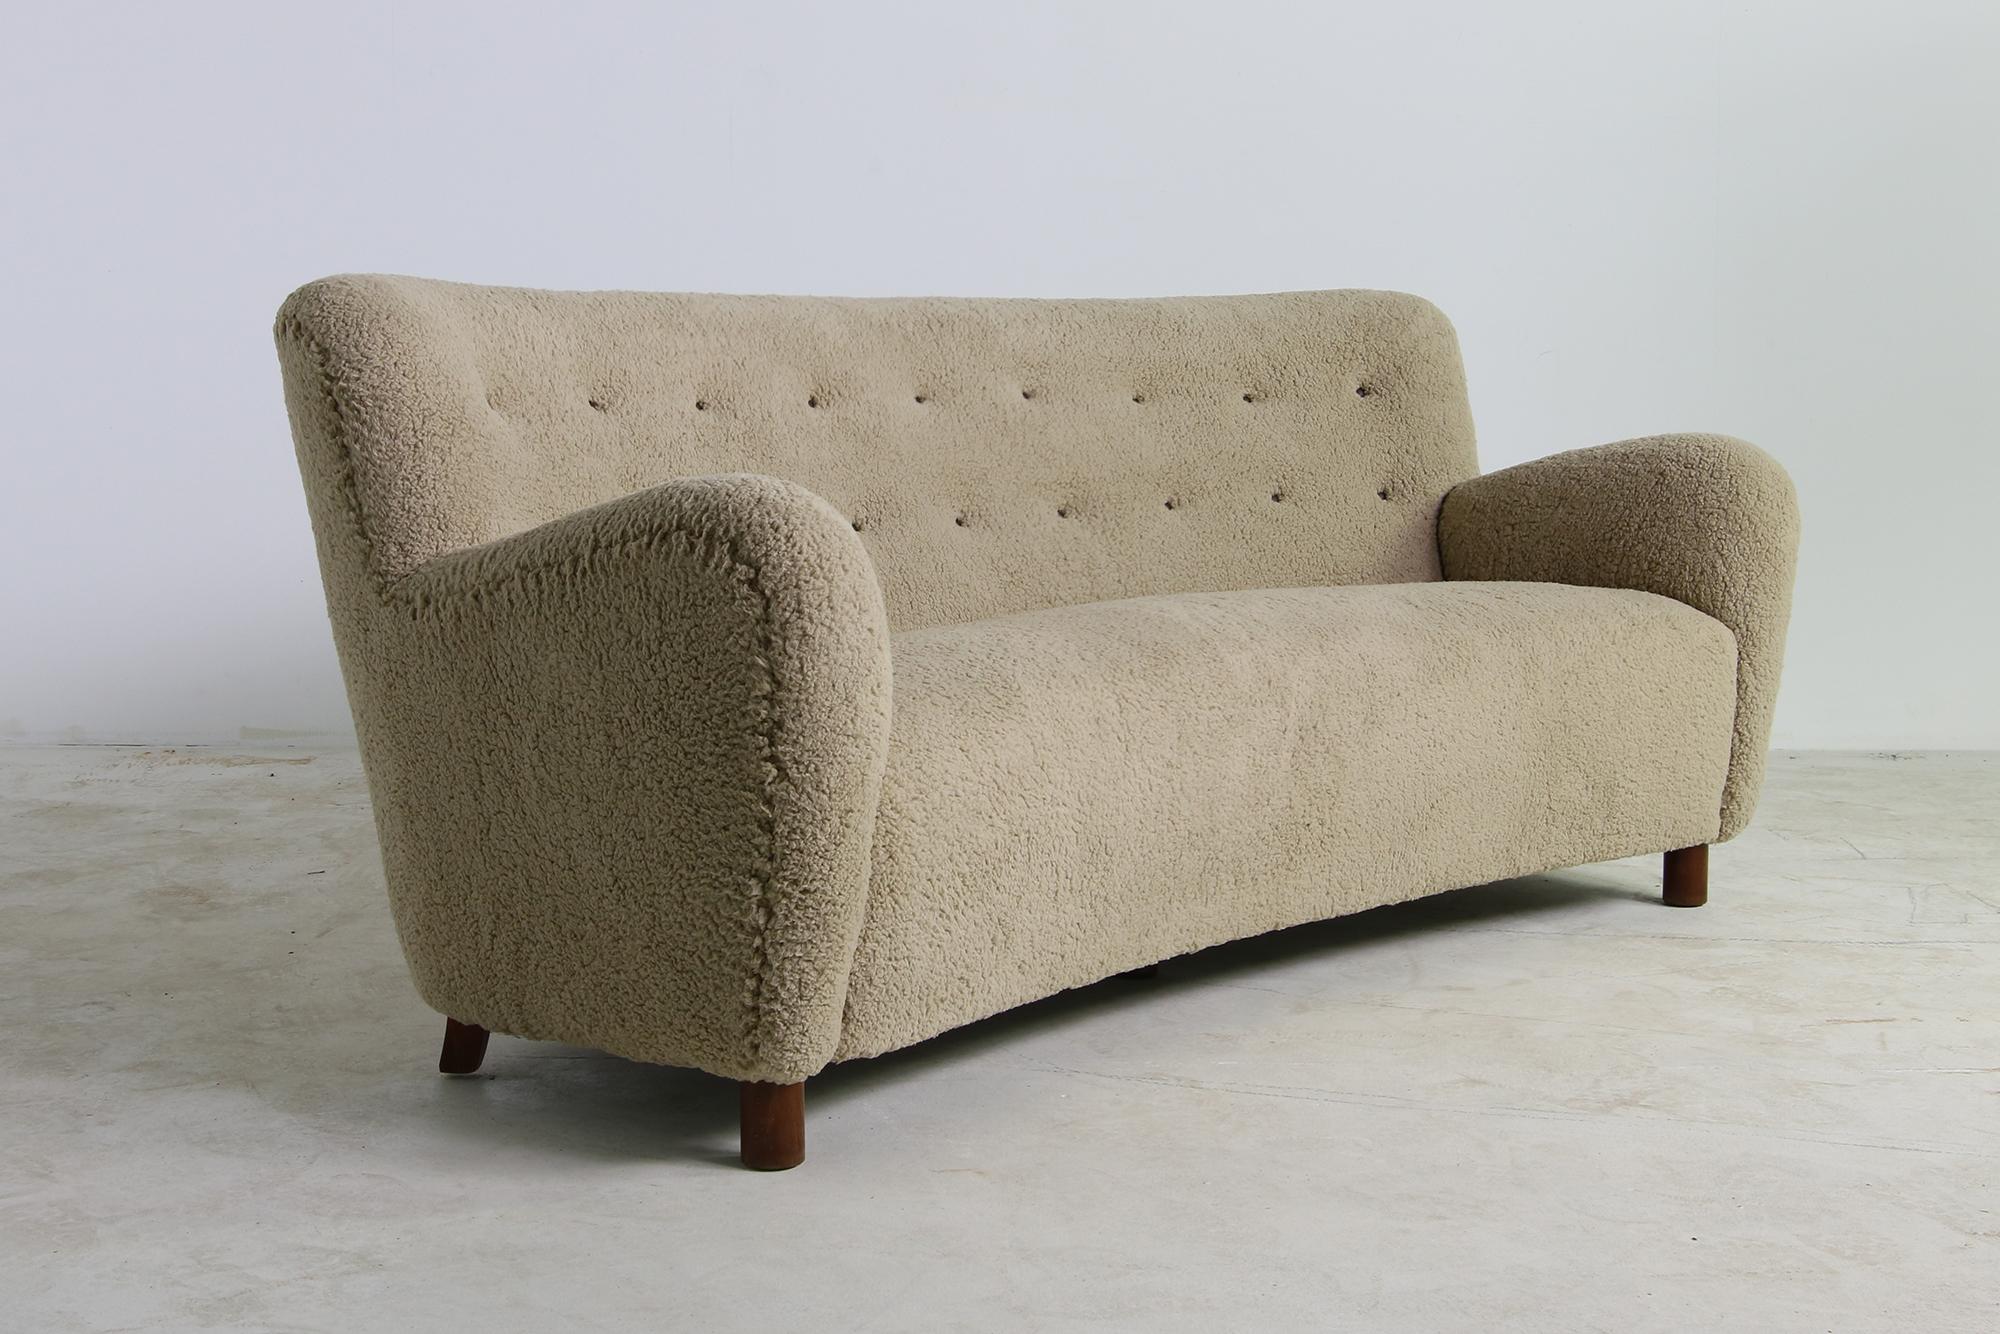 Beautiful authentic midcentury sofa, curved. Purchased in 1949 in Denmark, design attrib. to Mogens Lassen, typically round legs in the front and edgy legs in the back. Best condition, new upholstery and new eaerthy tone teddy fur fabric, like